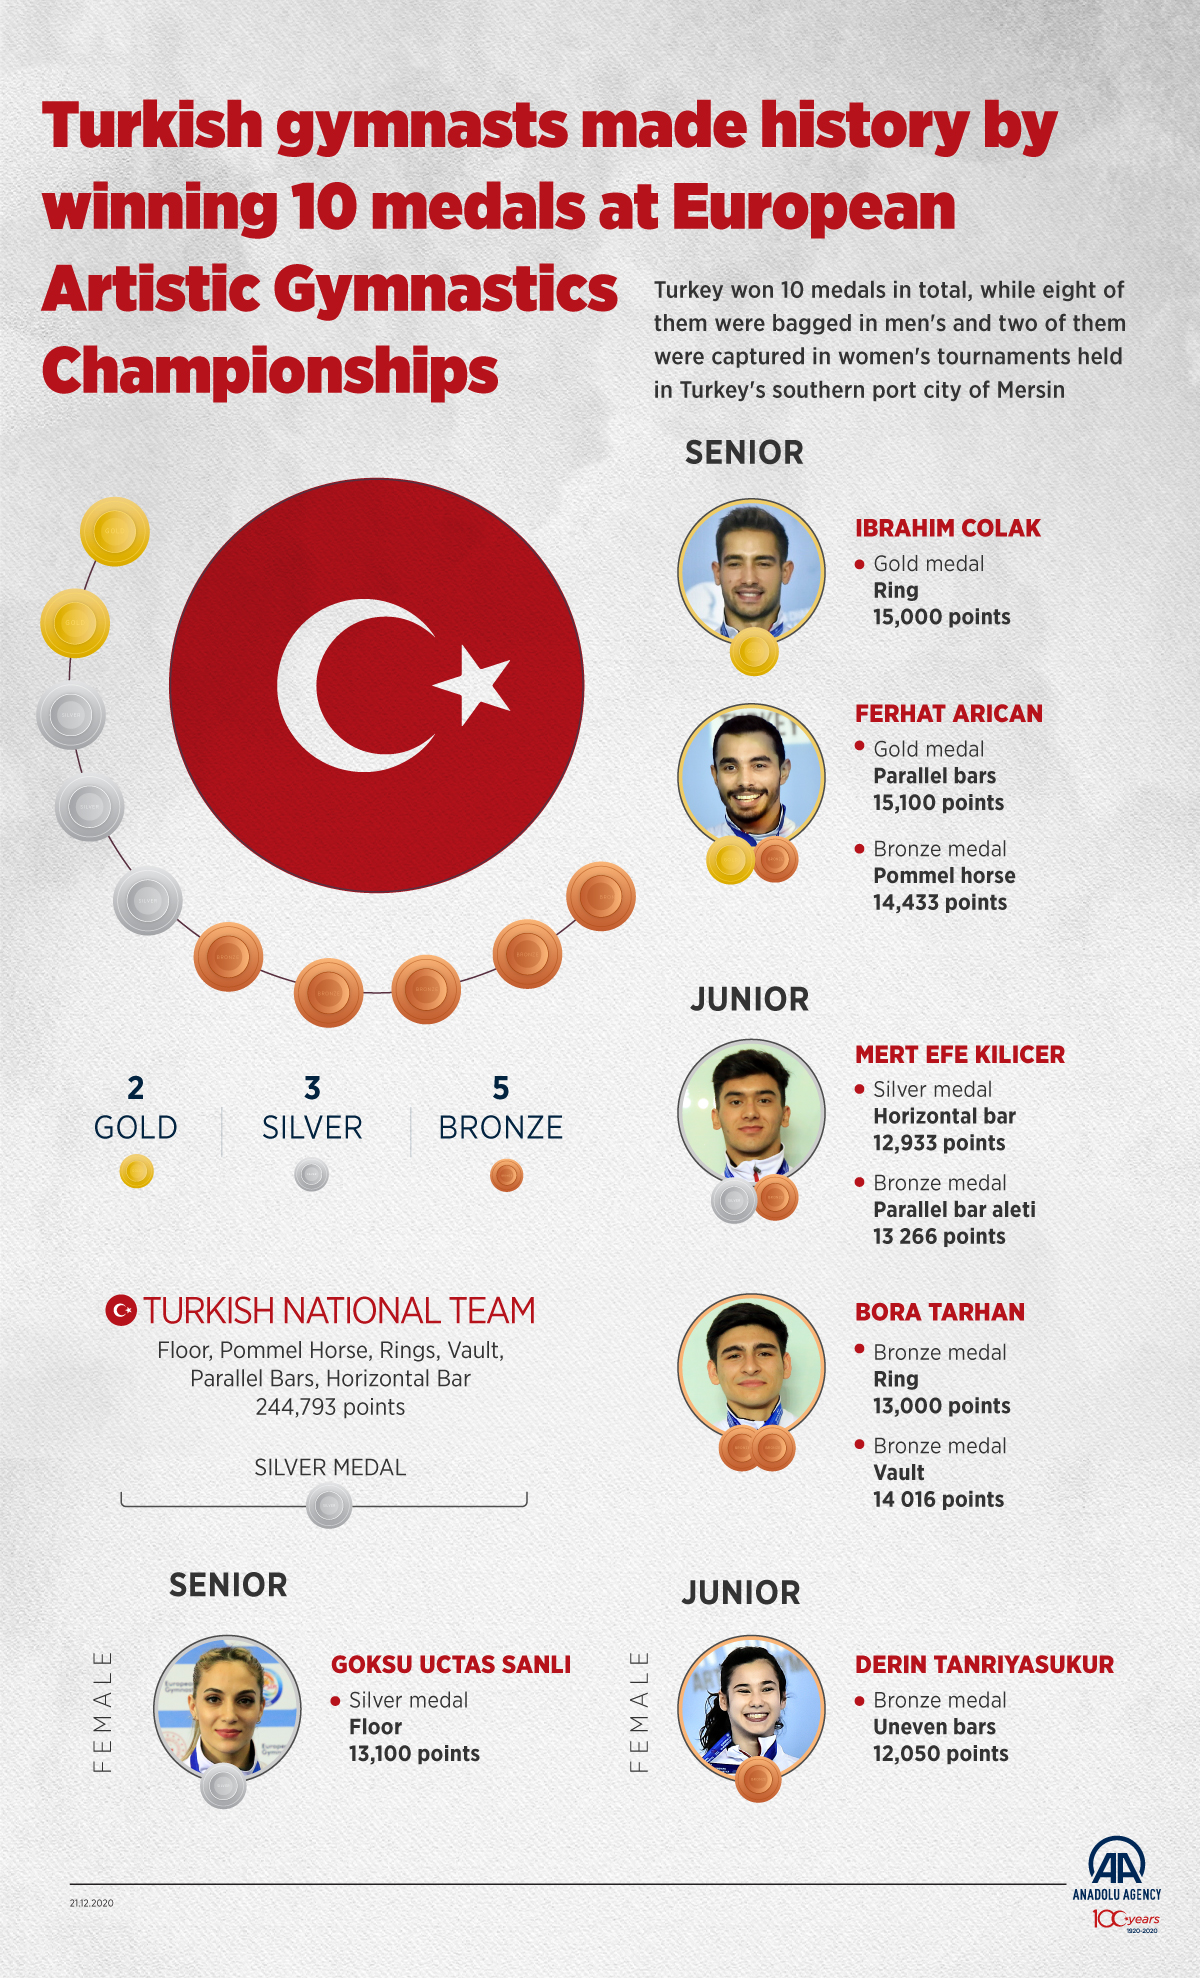 Turkish gymnasts made history by winning 10 medals at European Artistic Gymnastics Championships